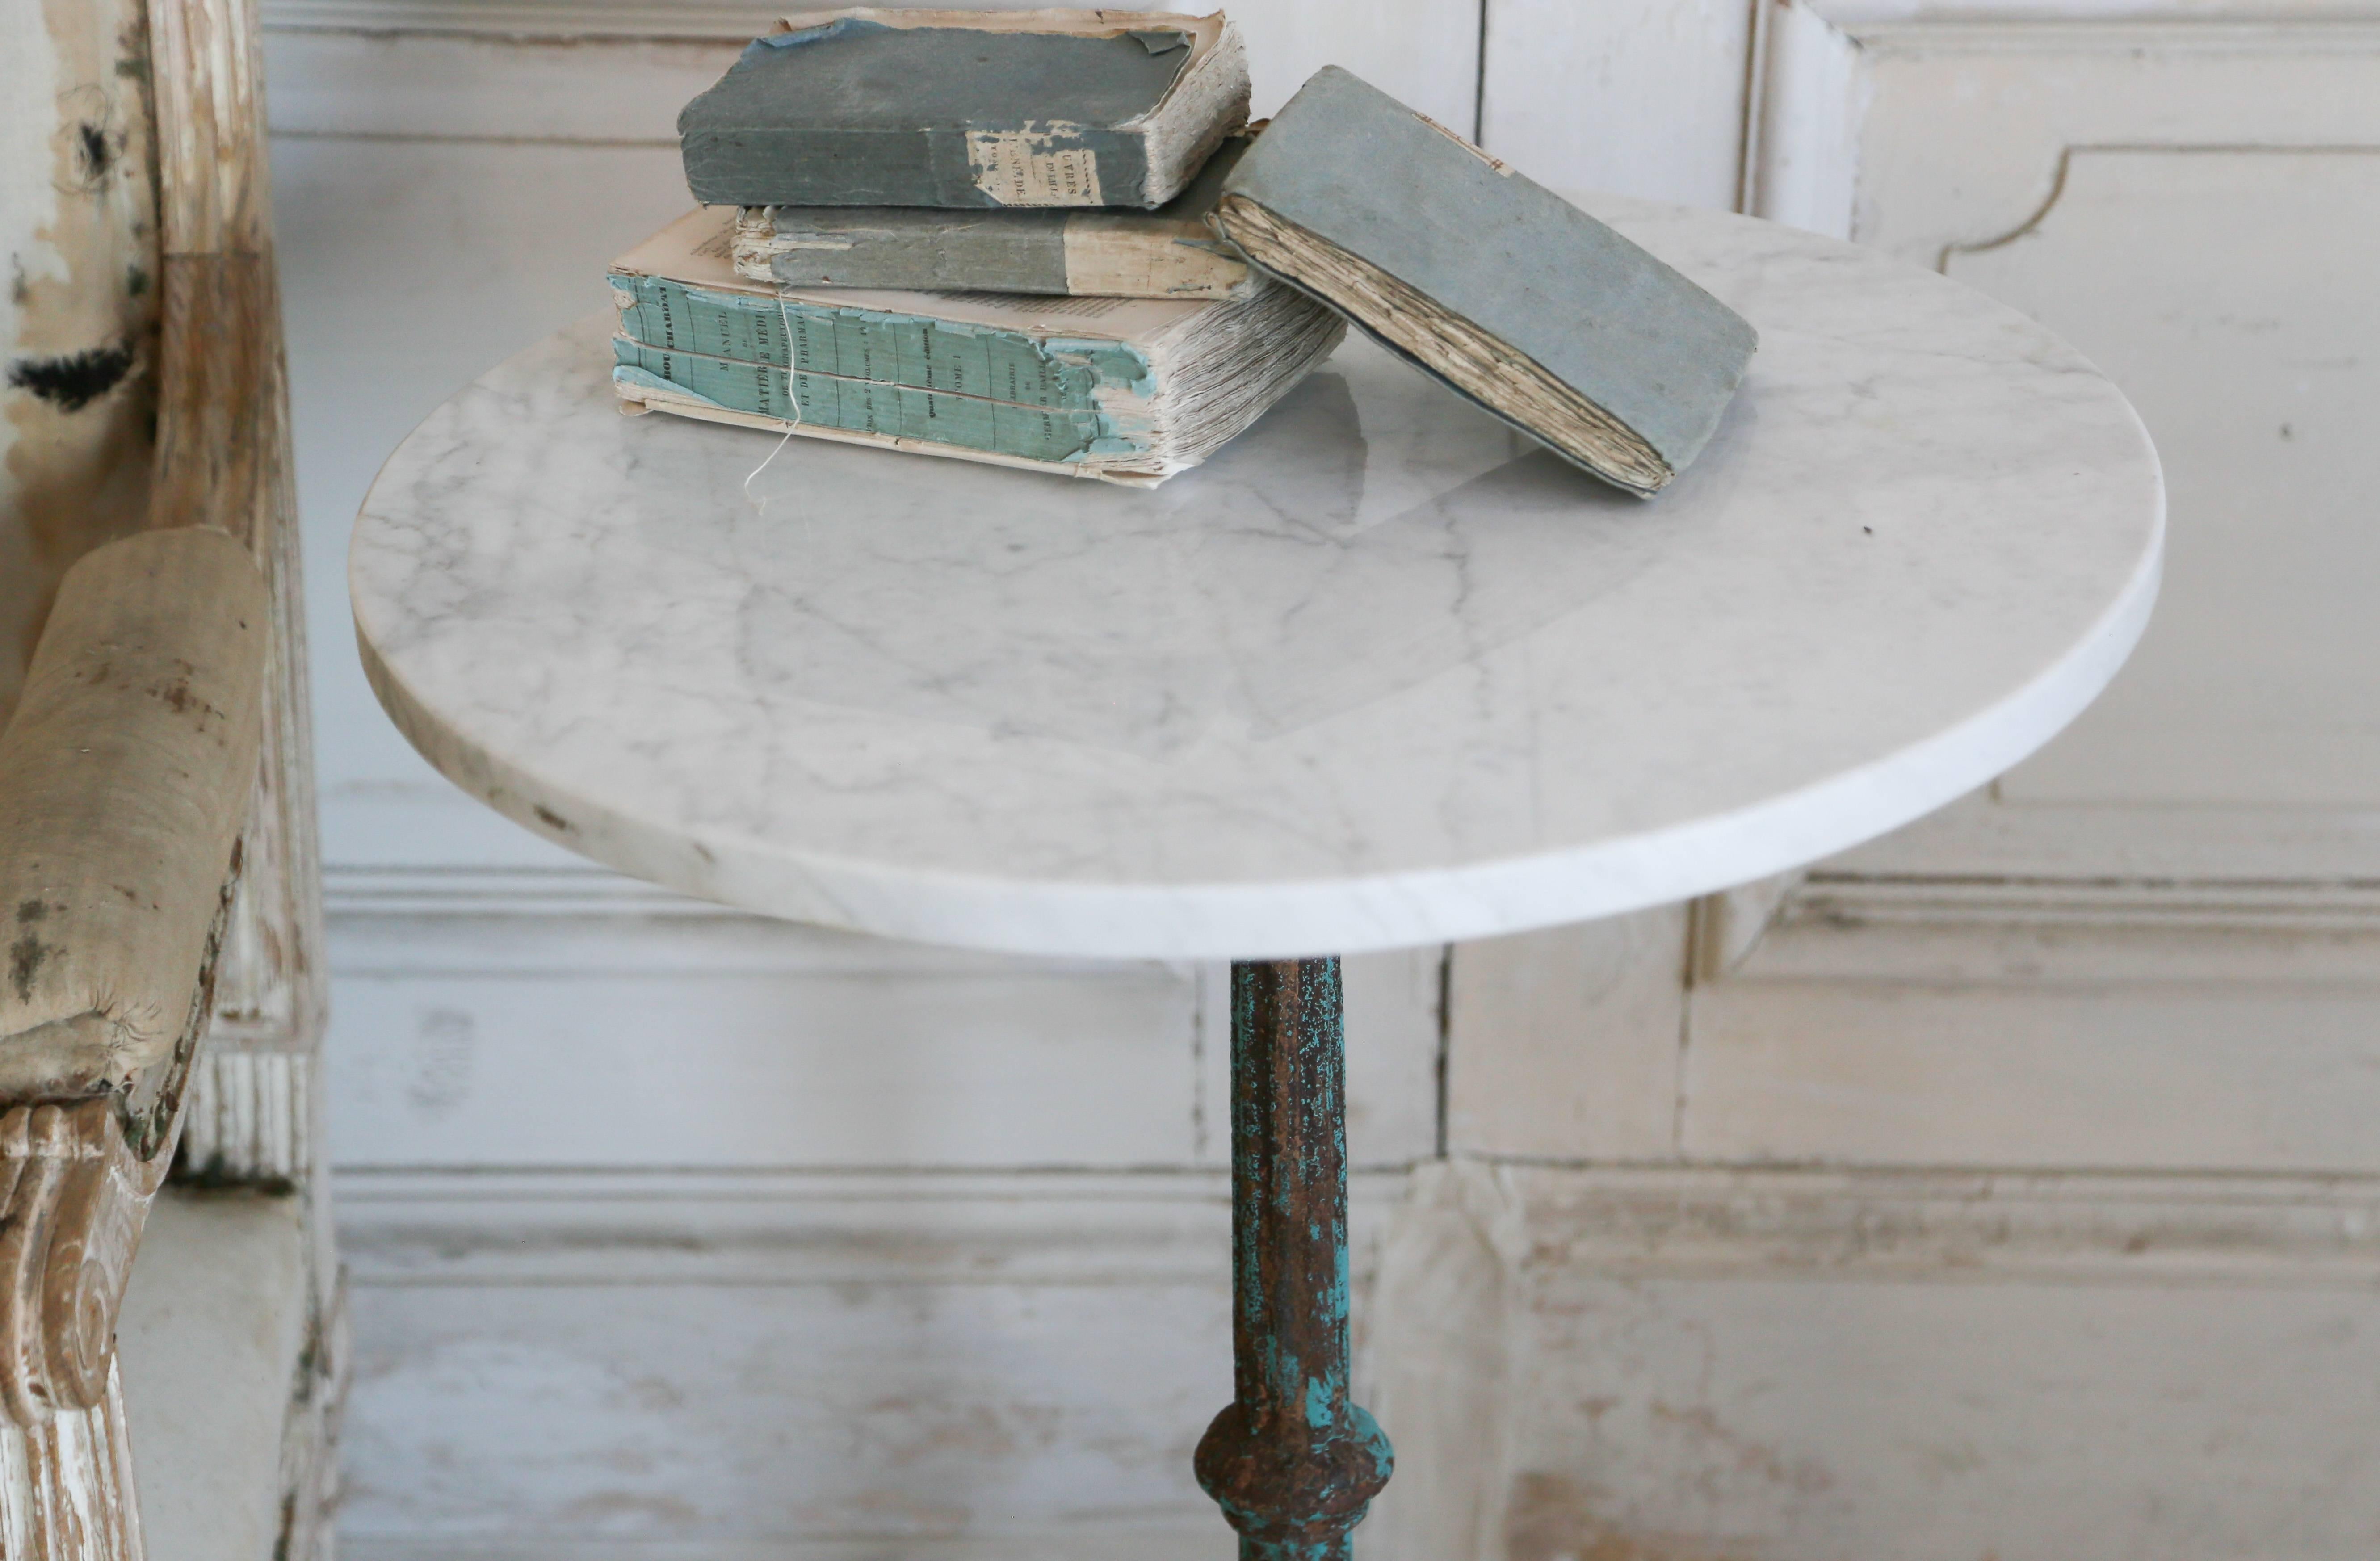 Adorable pair of bistro tables in distressed, turquoise iron with light Carrara marble tops. The pedestal leg is balanced by a tripod base decorated with swirls and ocean motifs. The tables inspire intimate conversations over a cup of coffee or